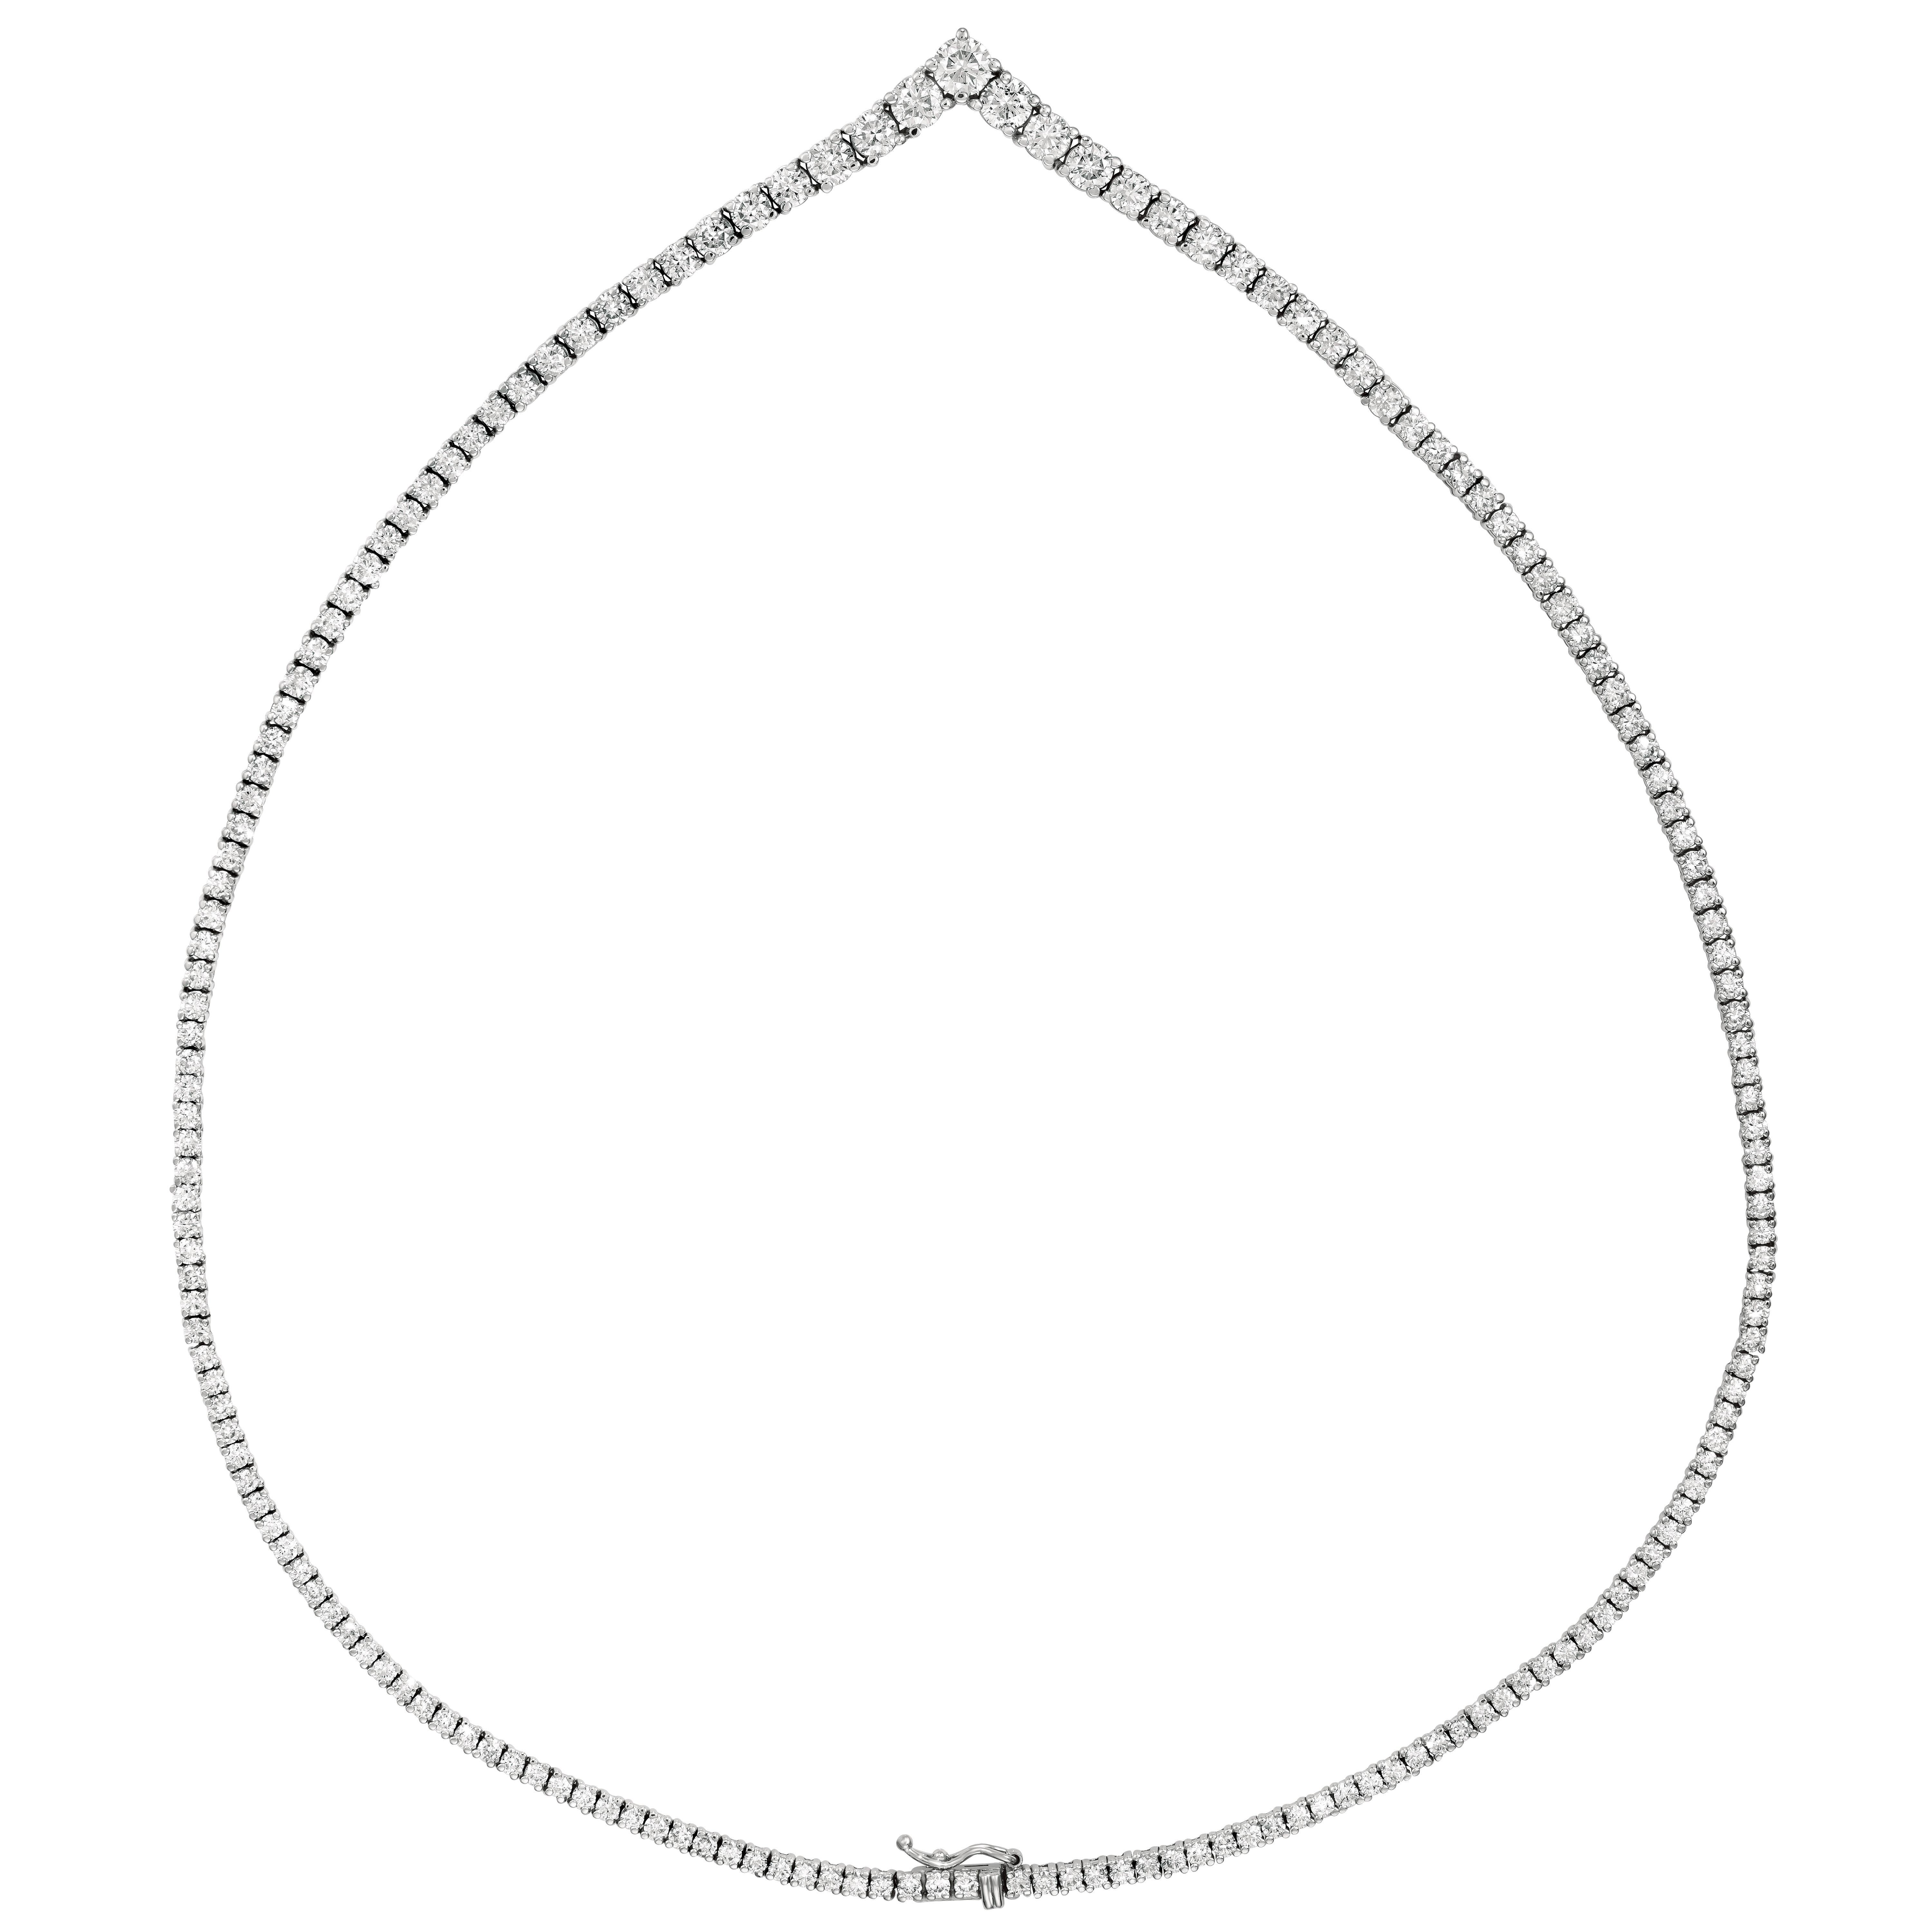 10.60 Carat Natural Diamond V Necklace 14K White Gold G SI 16 inches

100% Natural Diamonds, Not Enhanced in any way Round Cut Diamond Necklace
10.60CT
G-H
SI
14K White Gold, Prong style, 20.3 gram
1/4 inch in width
16 inches in length
167